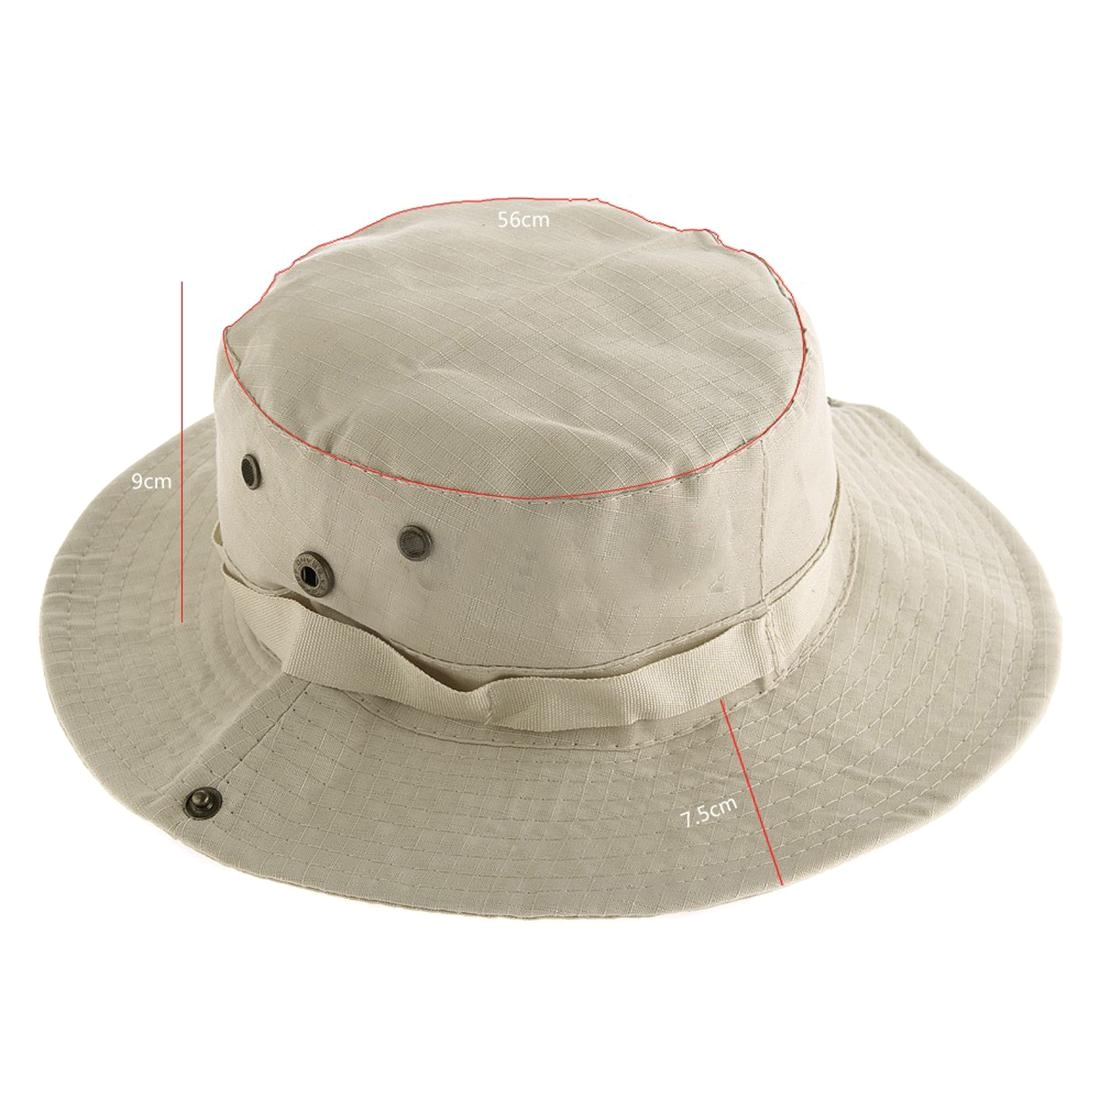 new fishing camping sunshade hats wide brim bucket hat traveling hiking bonnie hat with adjustable straps mens sports caps hat screen hats bull hat